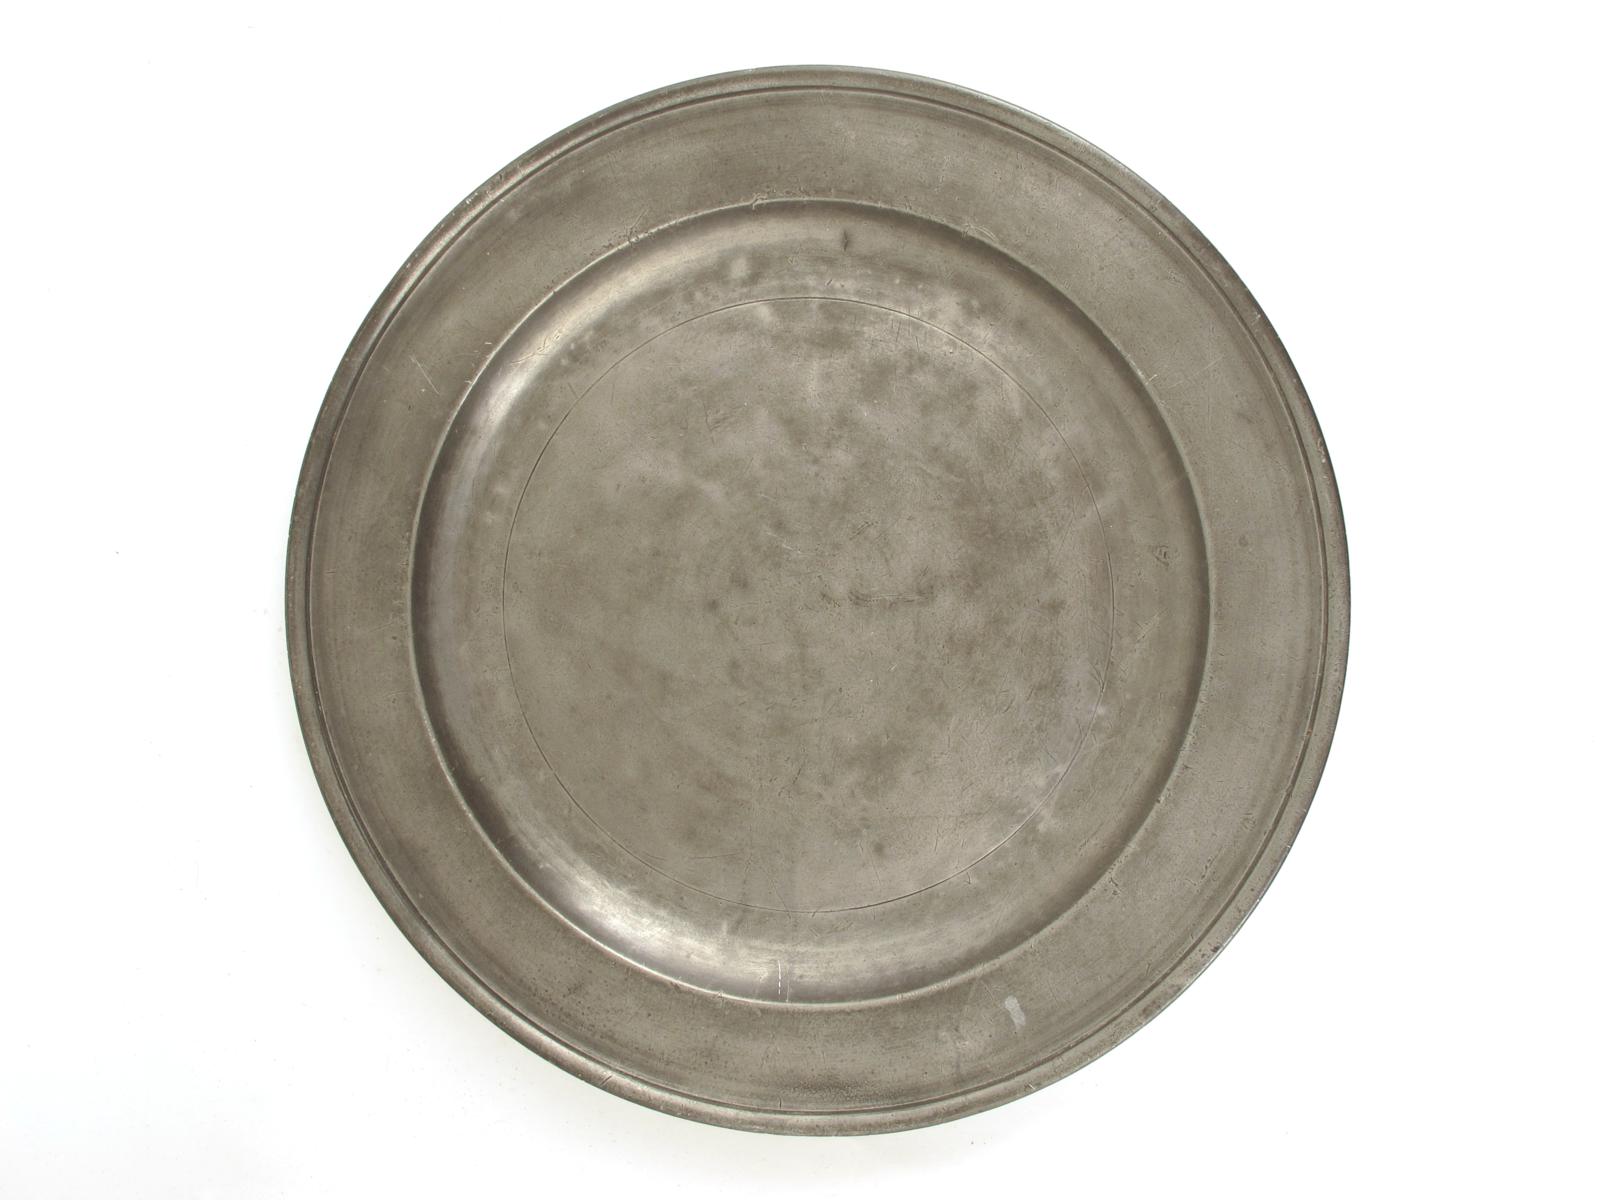 An 18th century pewter charger, with a single rim, by Robert Salder, London & Newcastle, c.1750,